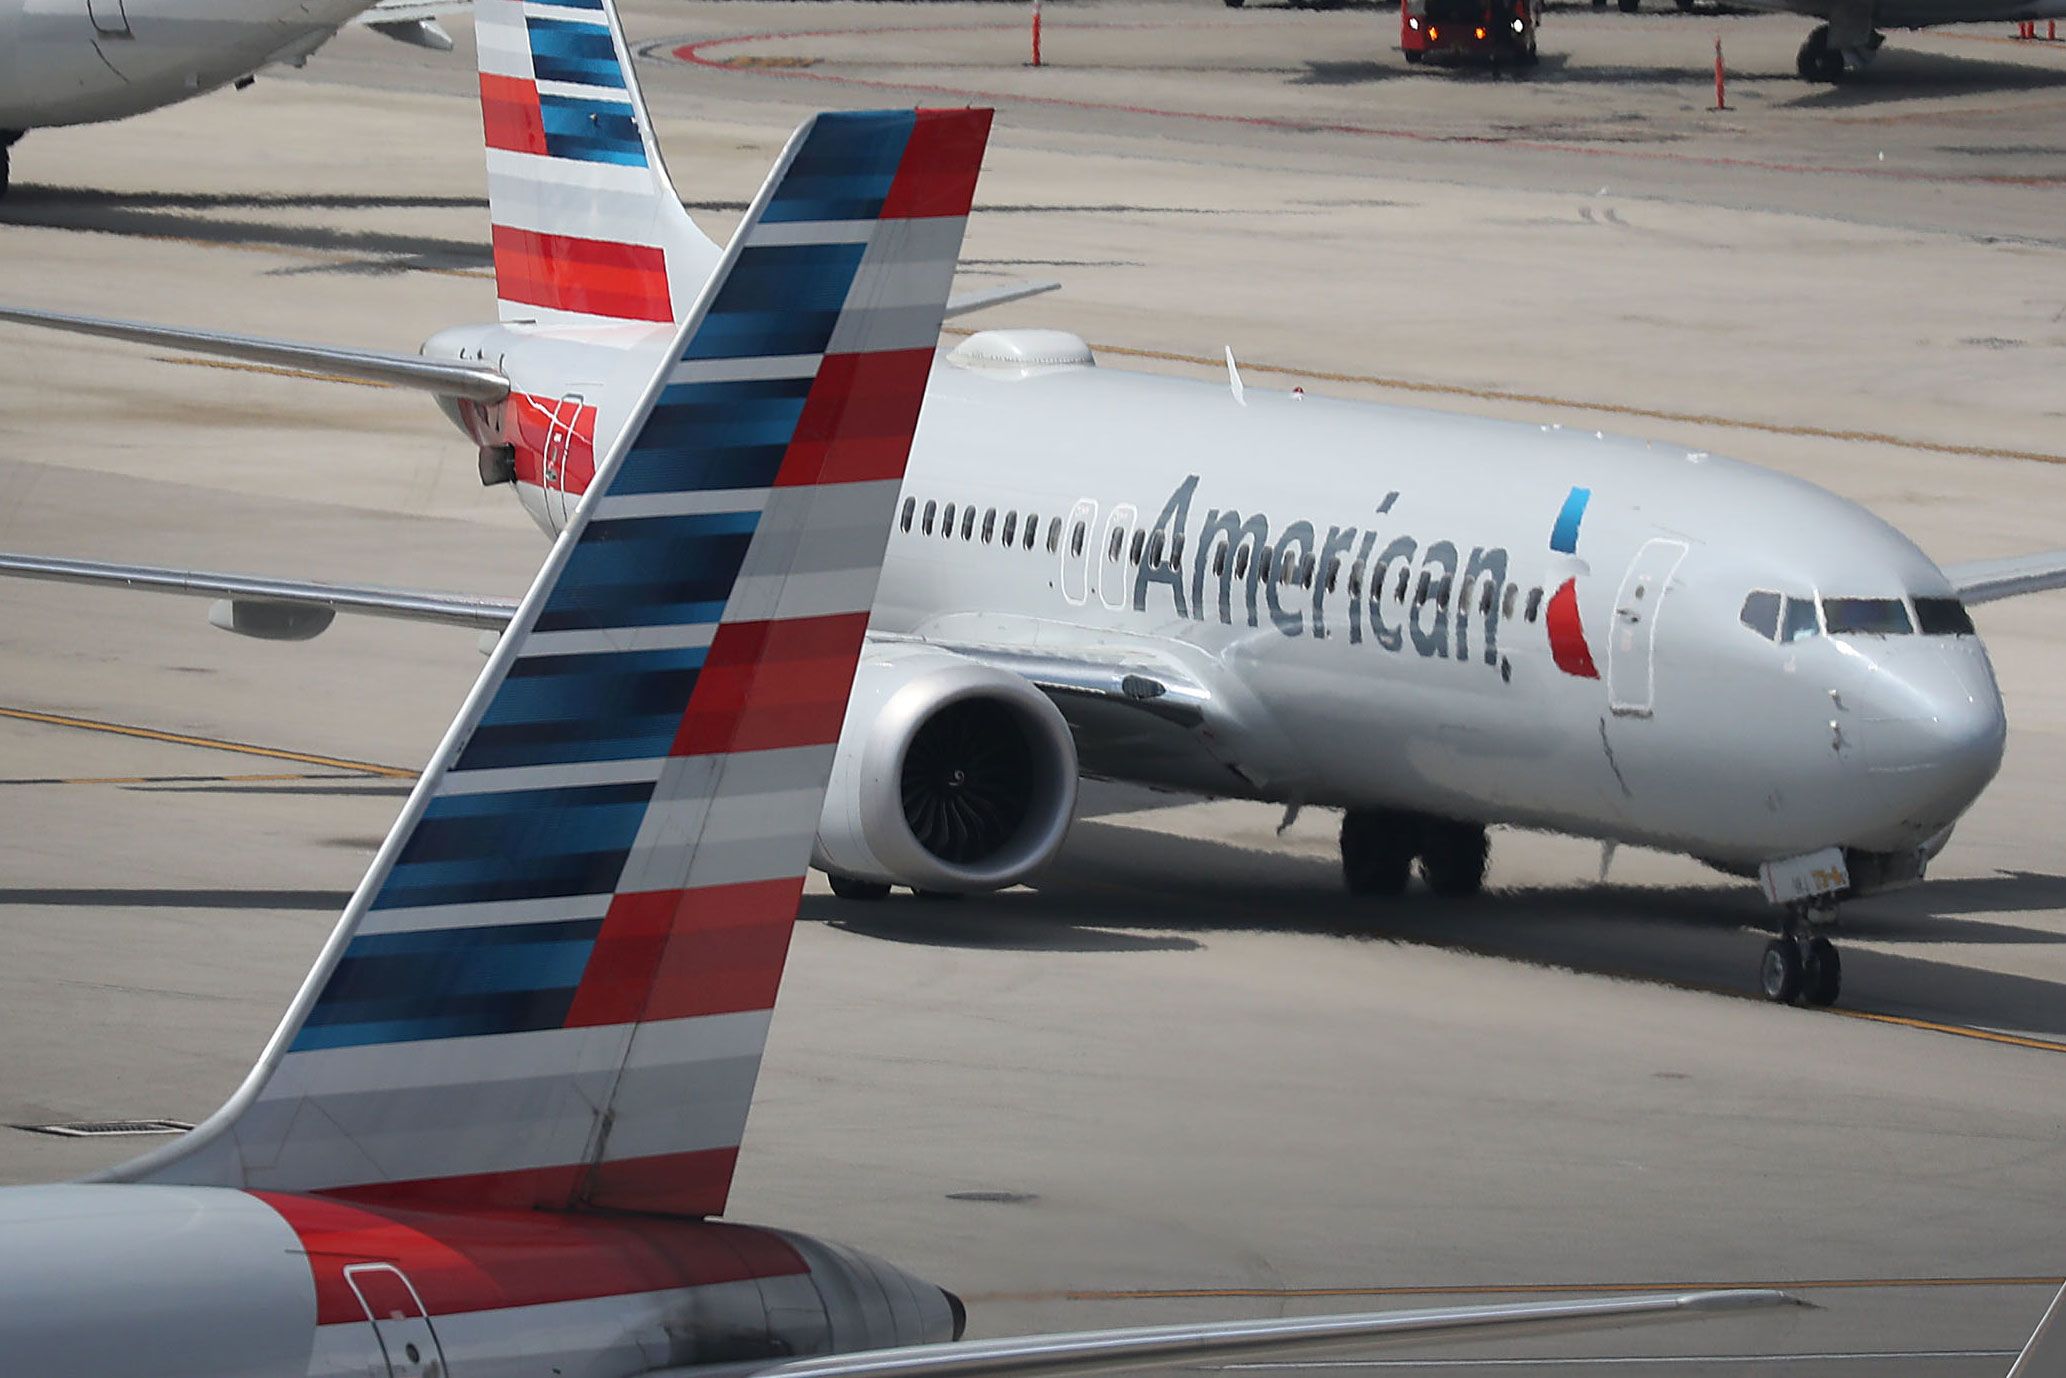 American Airlines' pilots union 'concerned' about Boeing 737 Max training